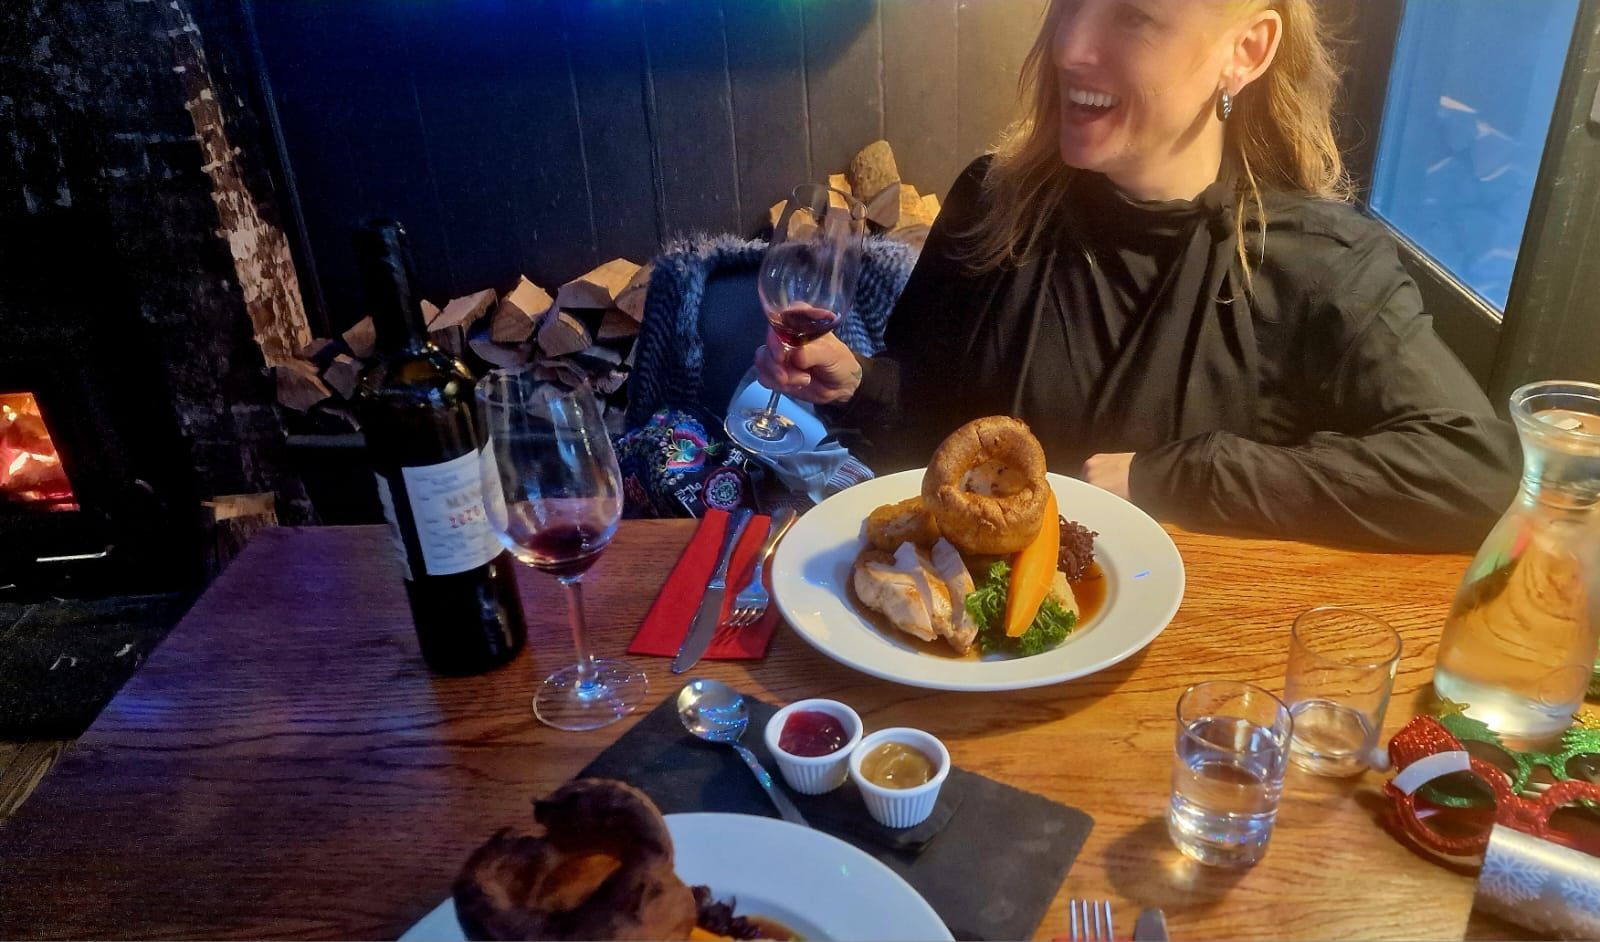 Jess friend enjoying her glass of red wine together with Sunday roast  delight at The New Inn.